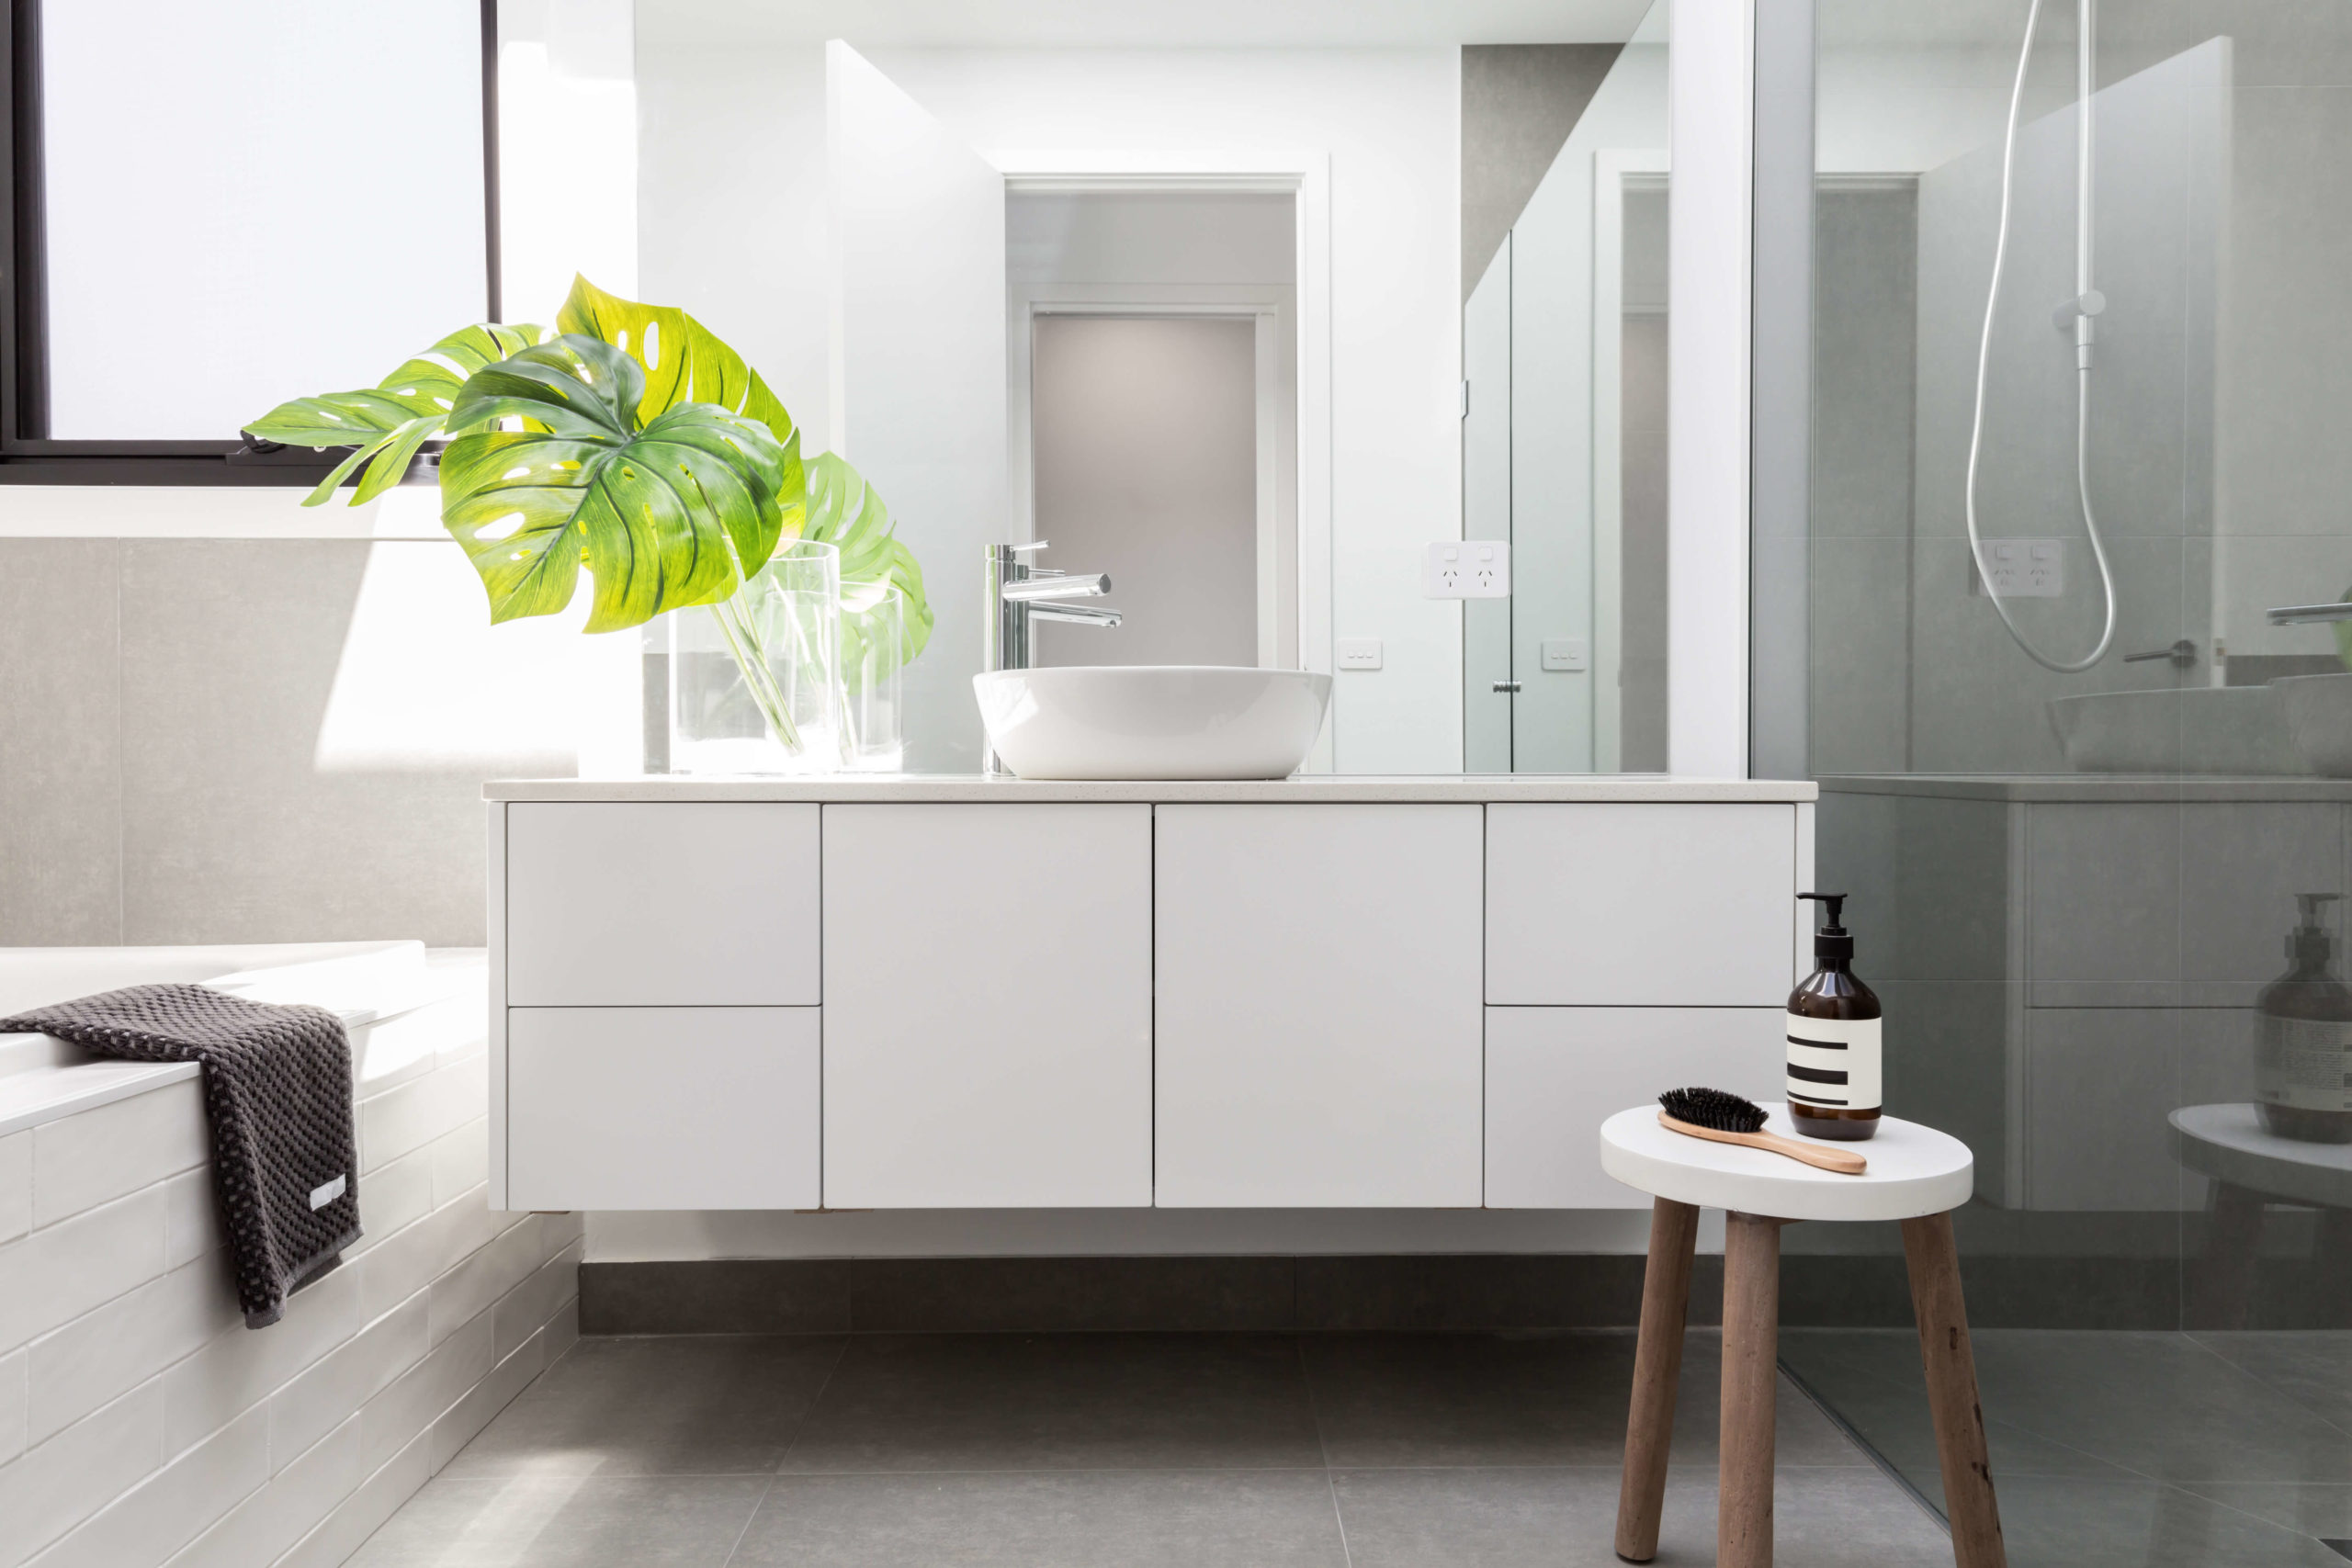 Top Bathroom Design Trends - Cabinetry and Storage Spaces